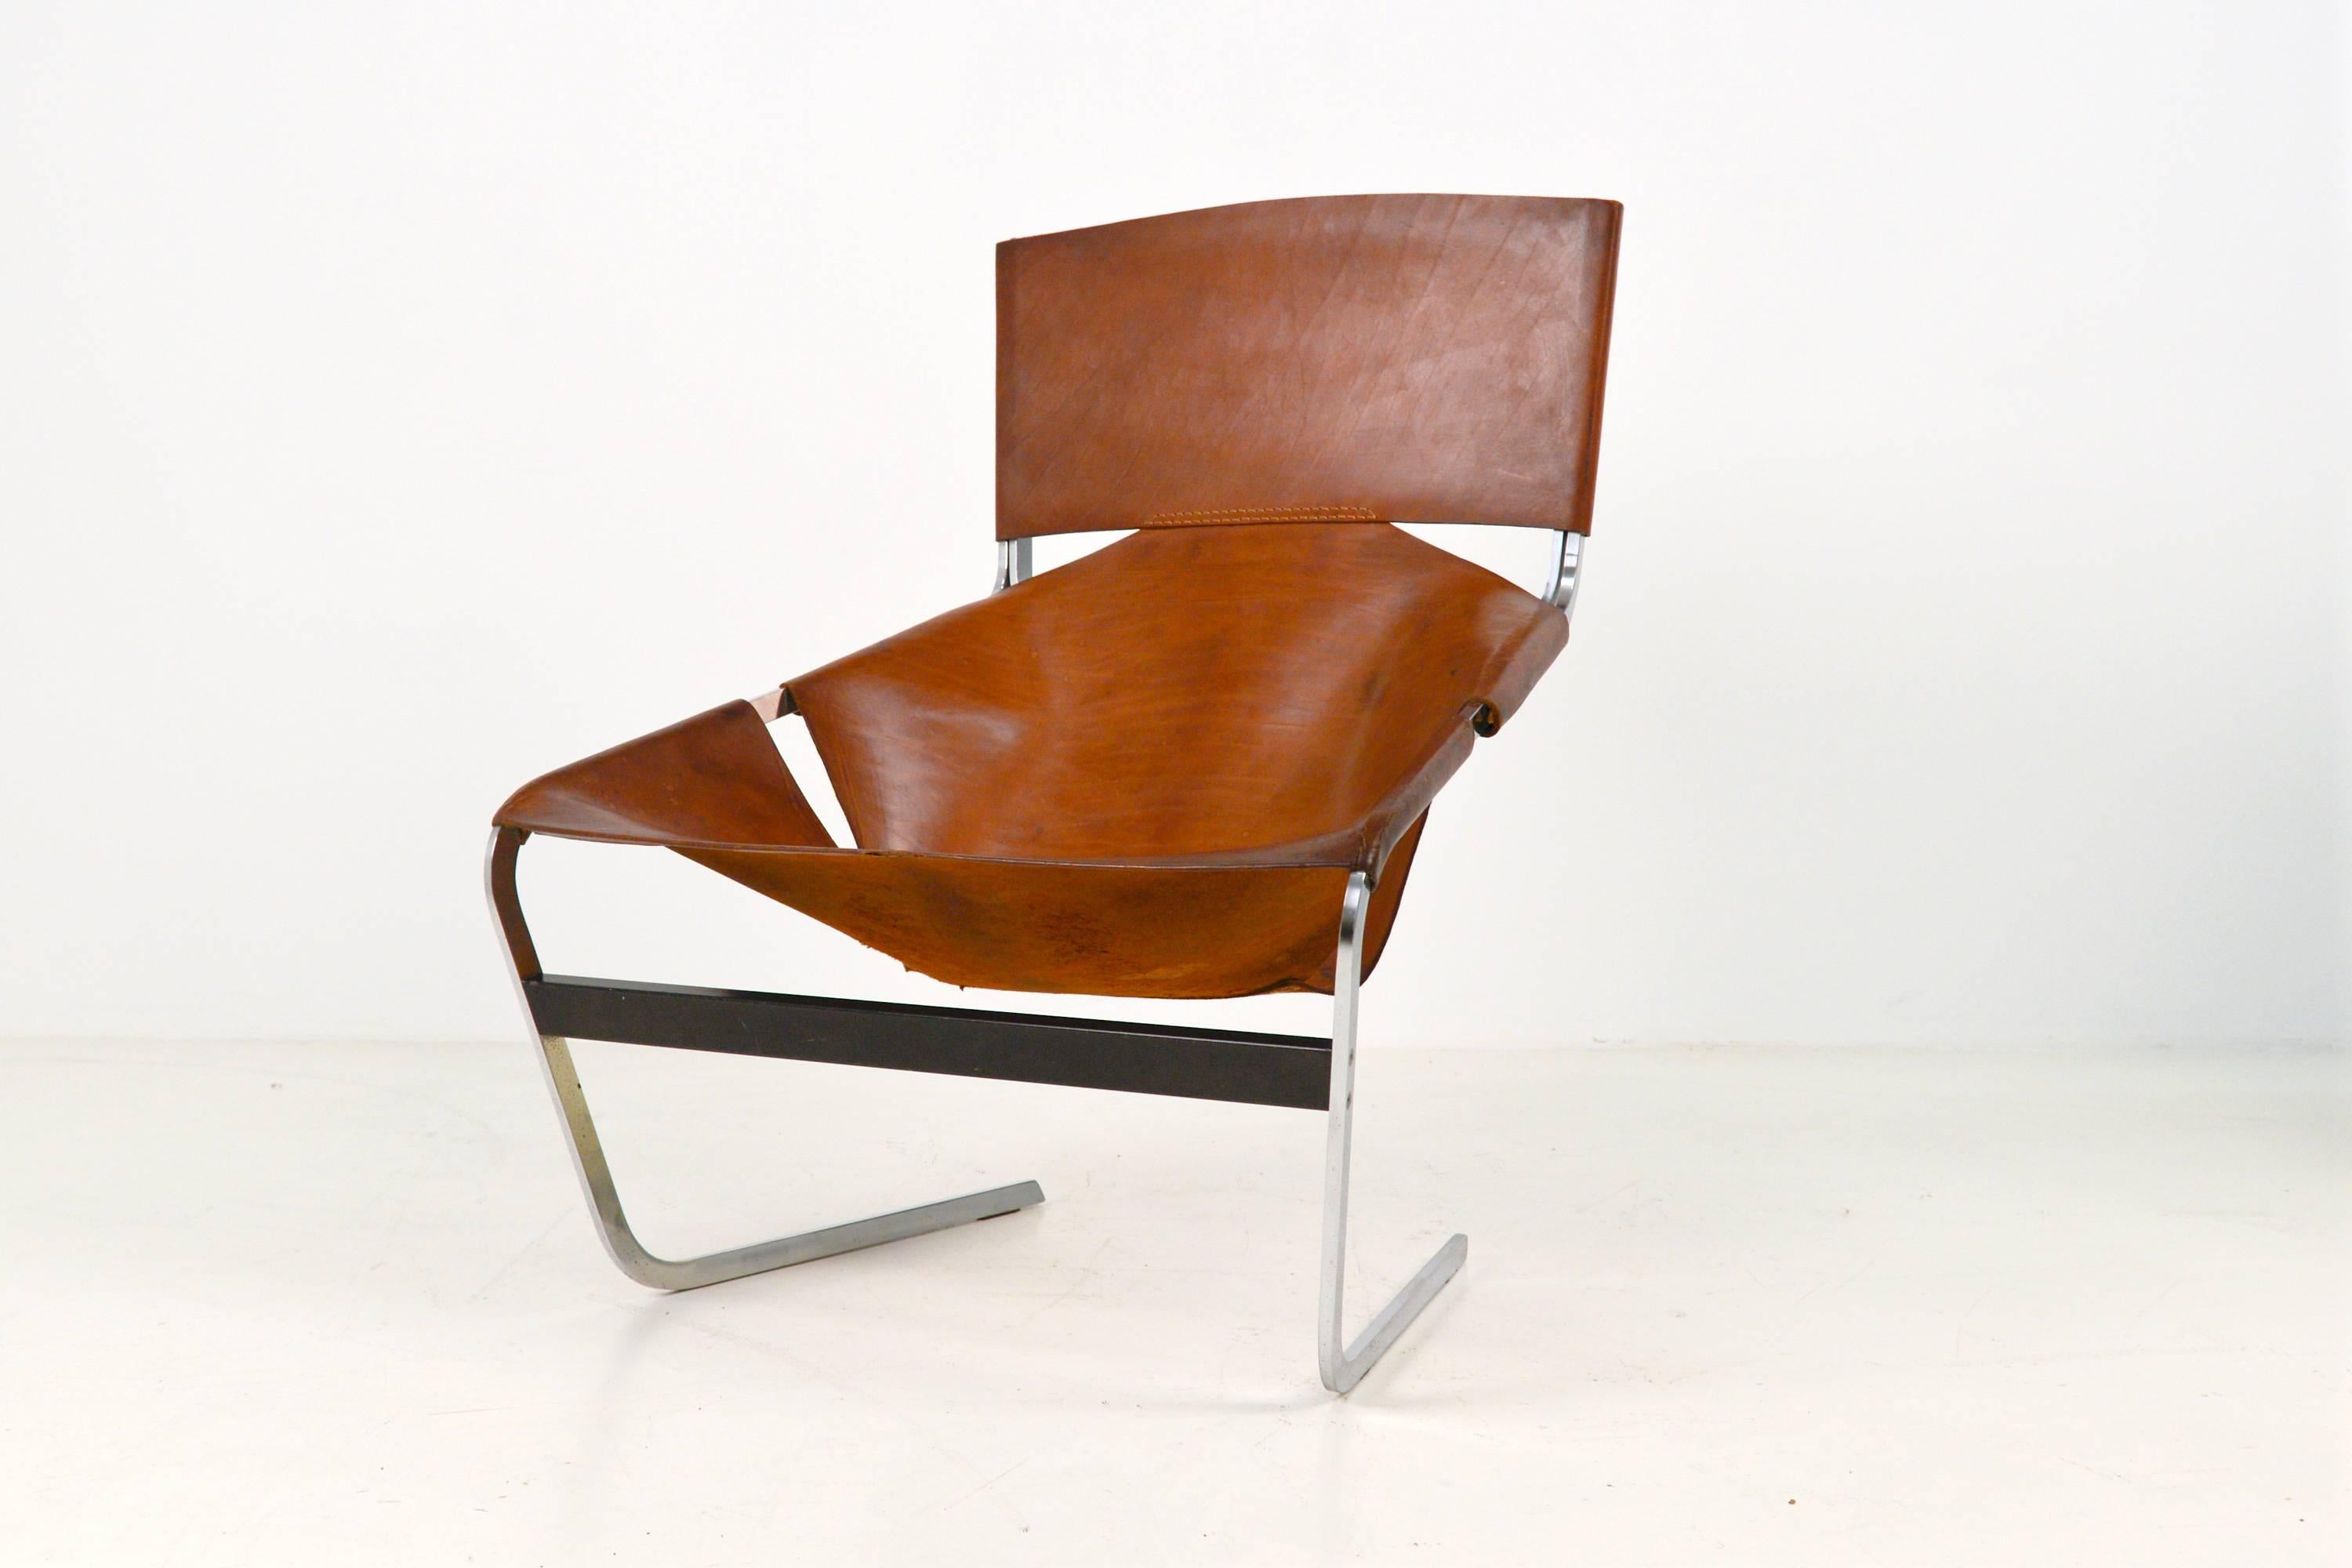 Artifort F444, Pierre Paulin lounge chair.
Pierre Paulin designed this chair in 1963 for Artifort.
This chair has been produced circa 1968!
Solid steel frame with a saddle leather sling seat.
This example is in a well preserved original